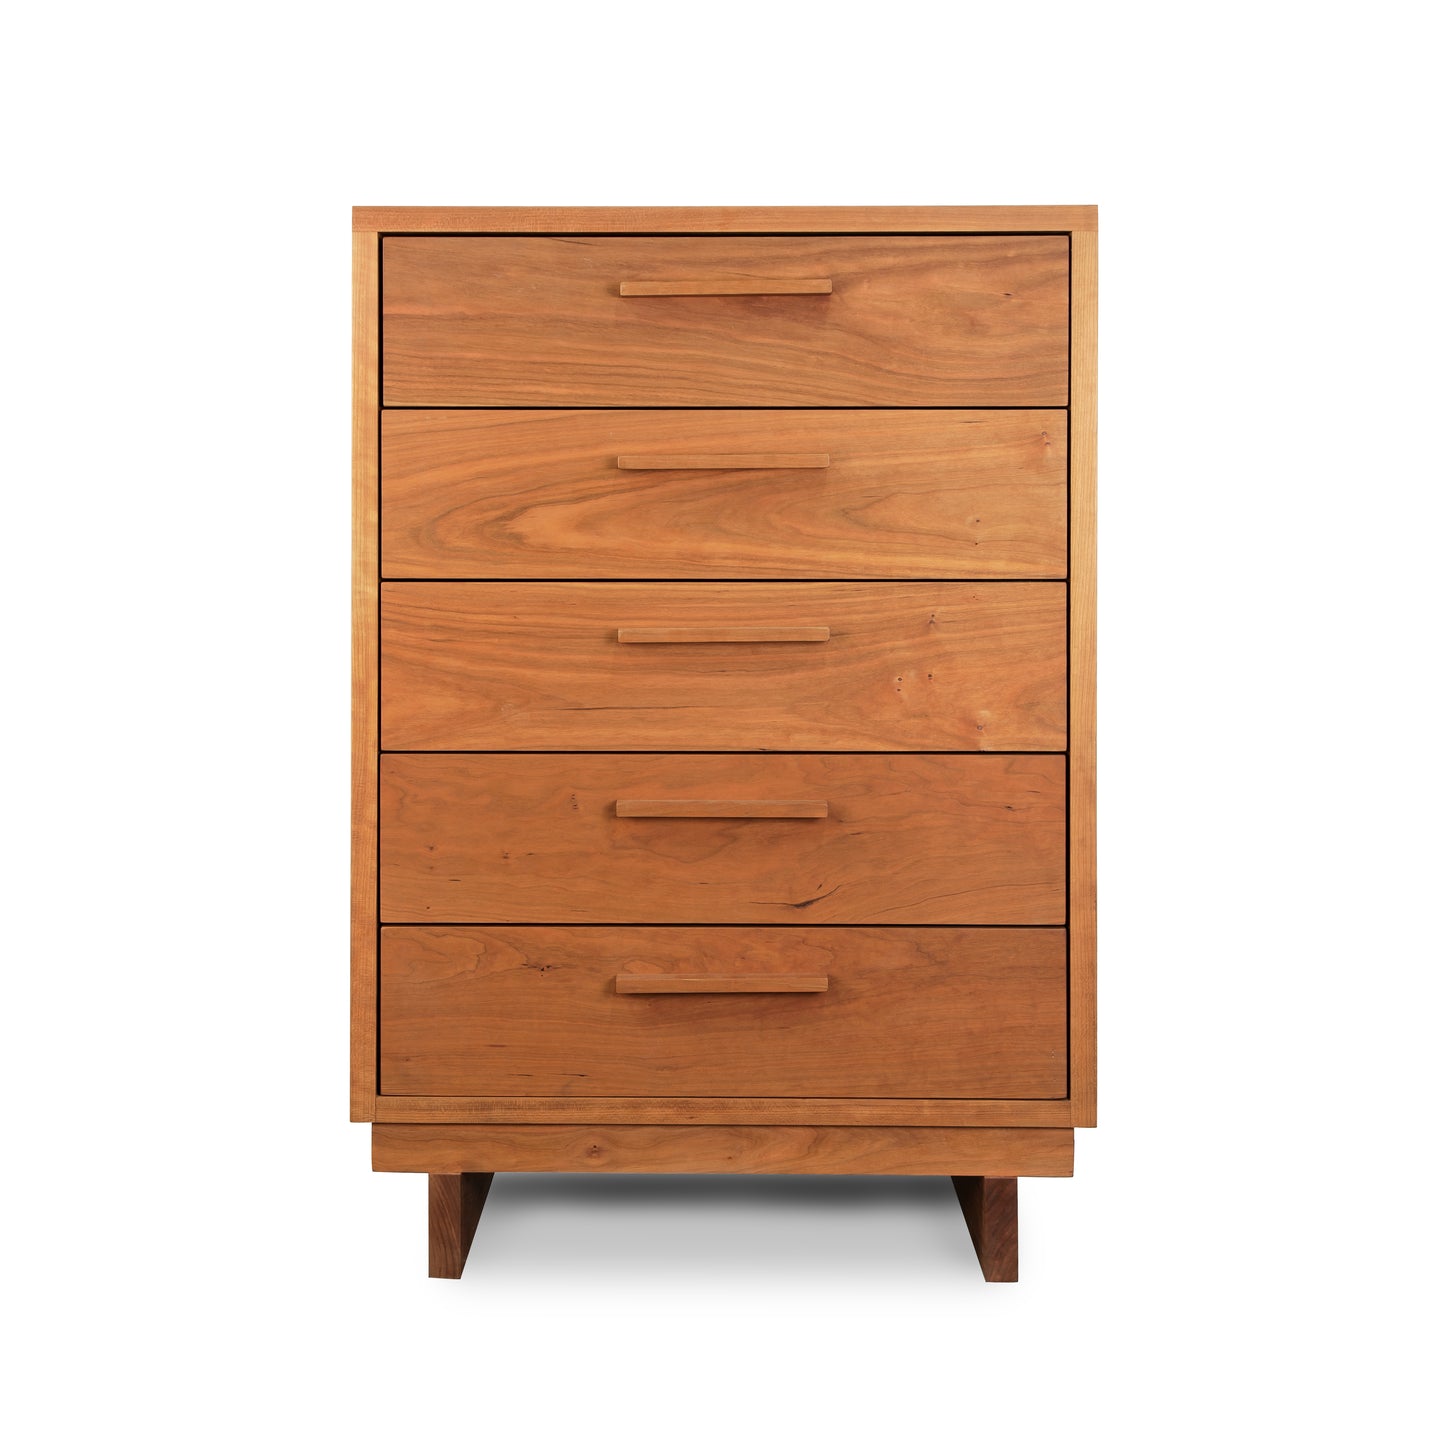 Vermont Furniture Designs Loft 5-Drawer Chest in natural solid hardwood on a white background.